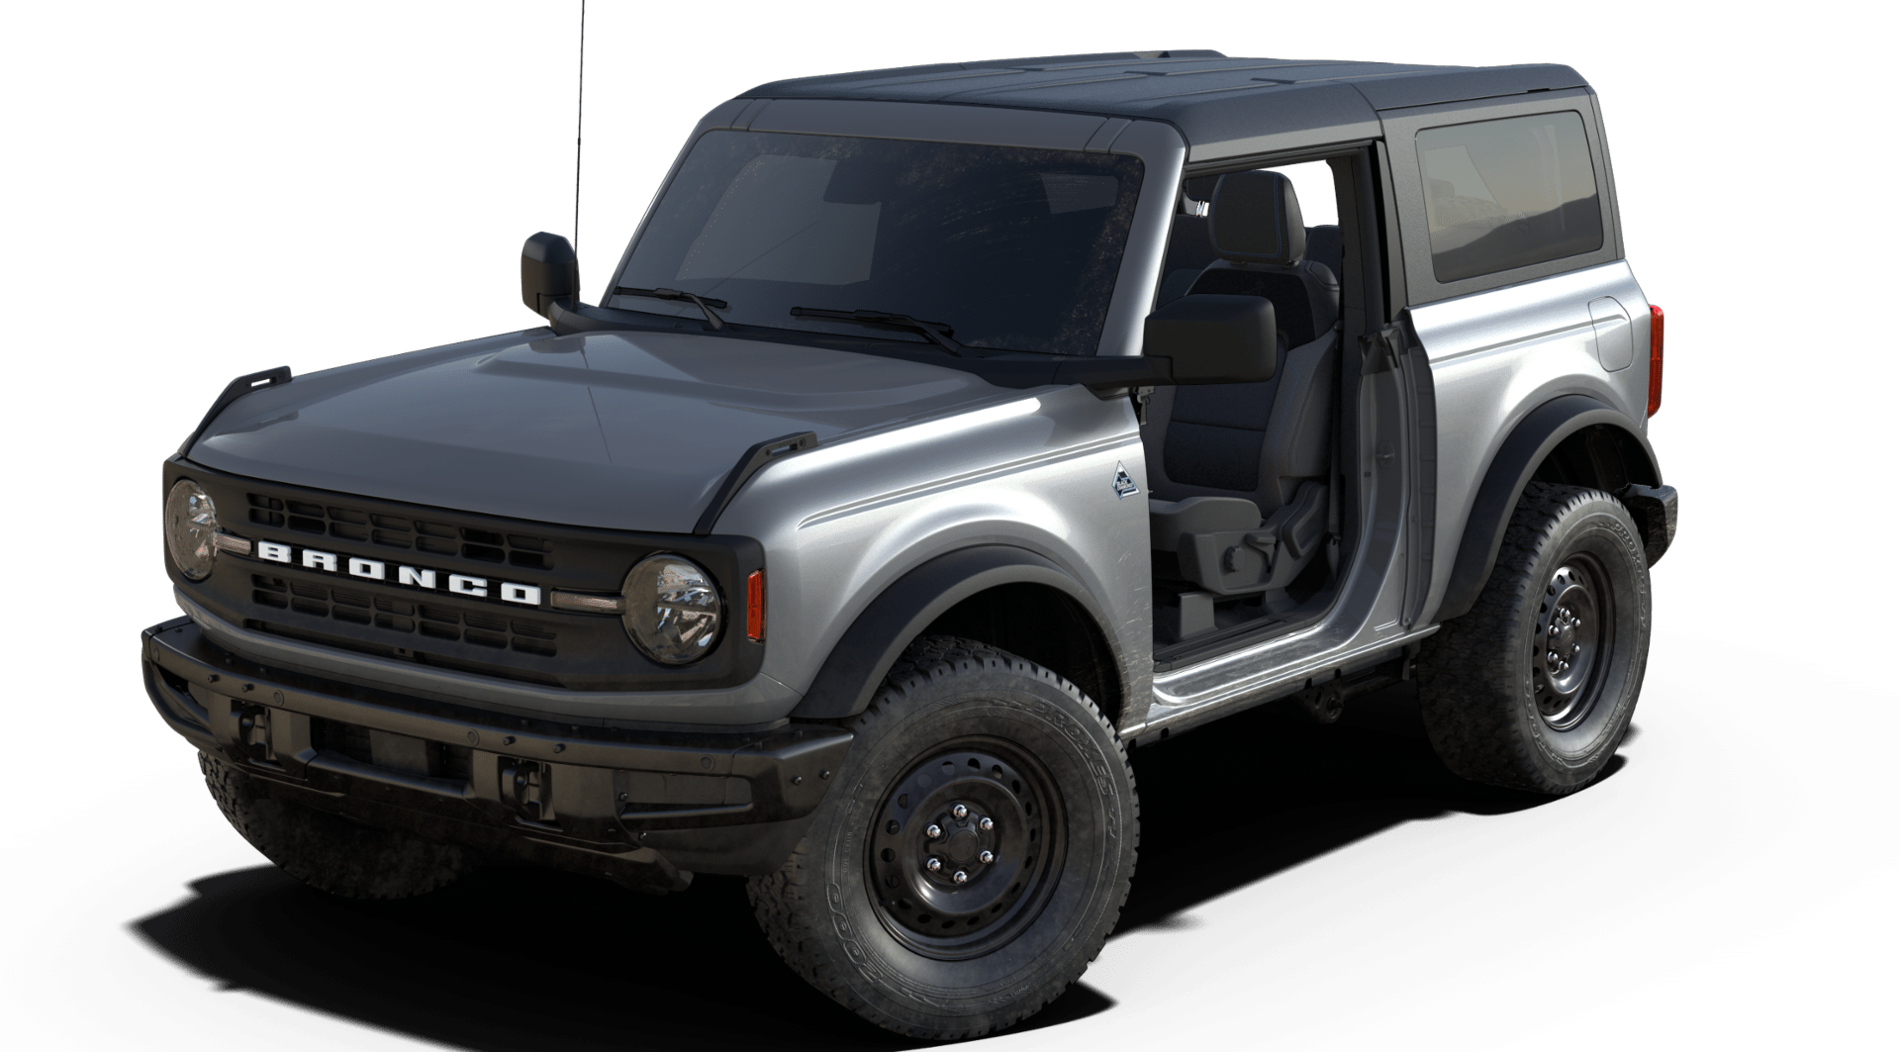 Ford Bronco Round 2 of hacked Bronco build & price configurator looks at all trims 1598318148851